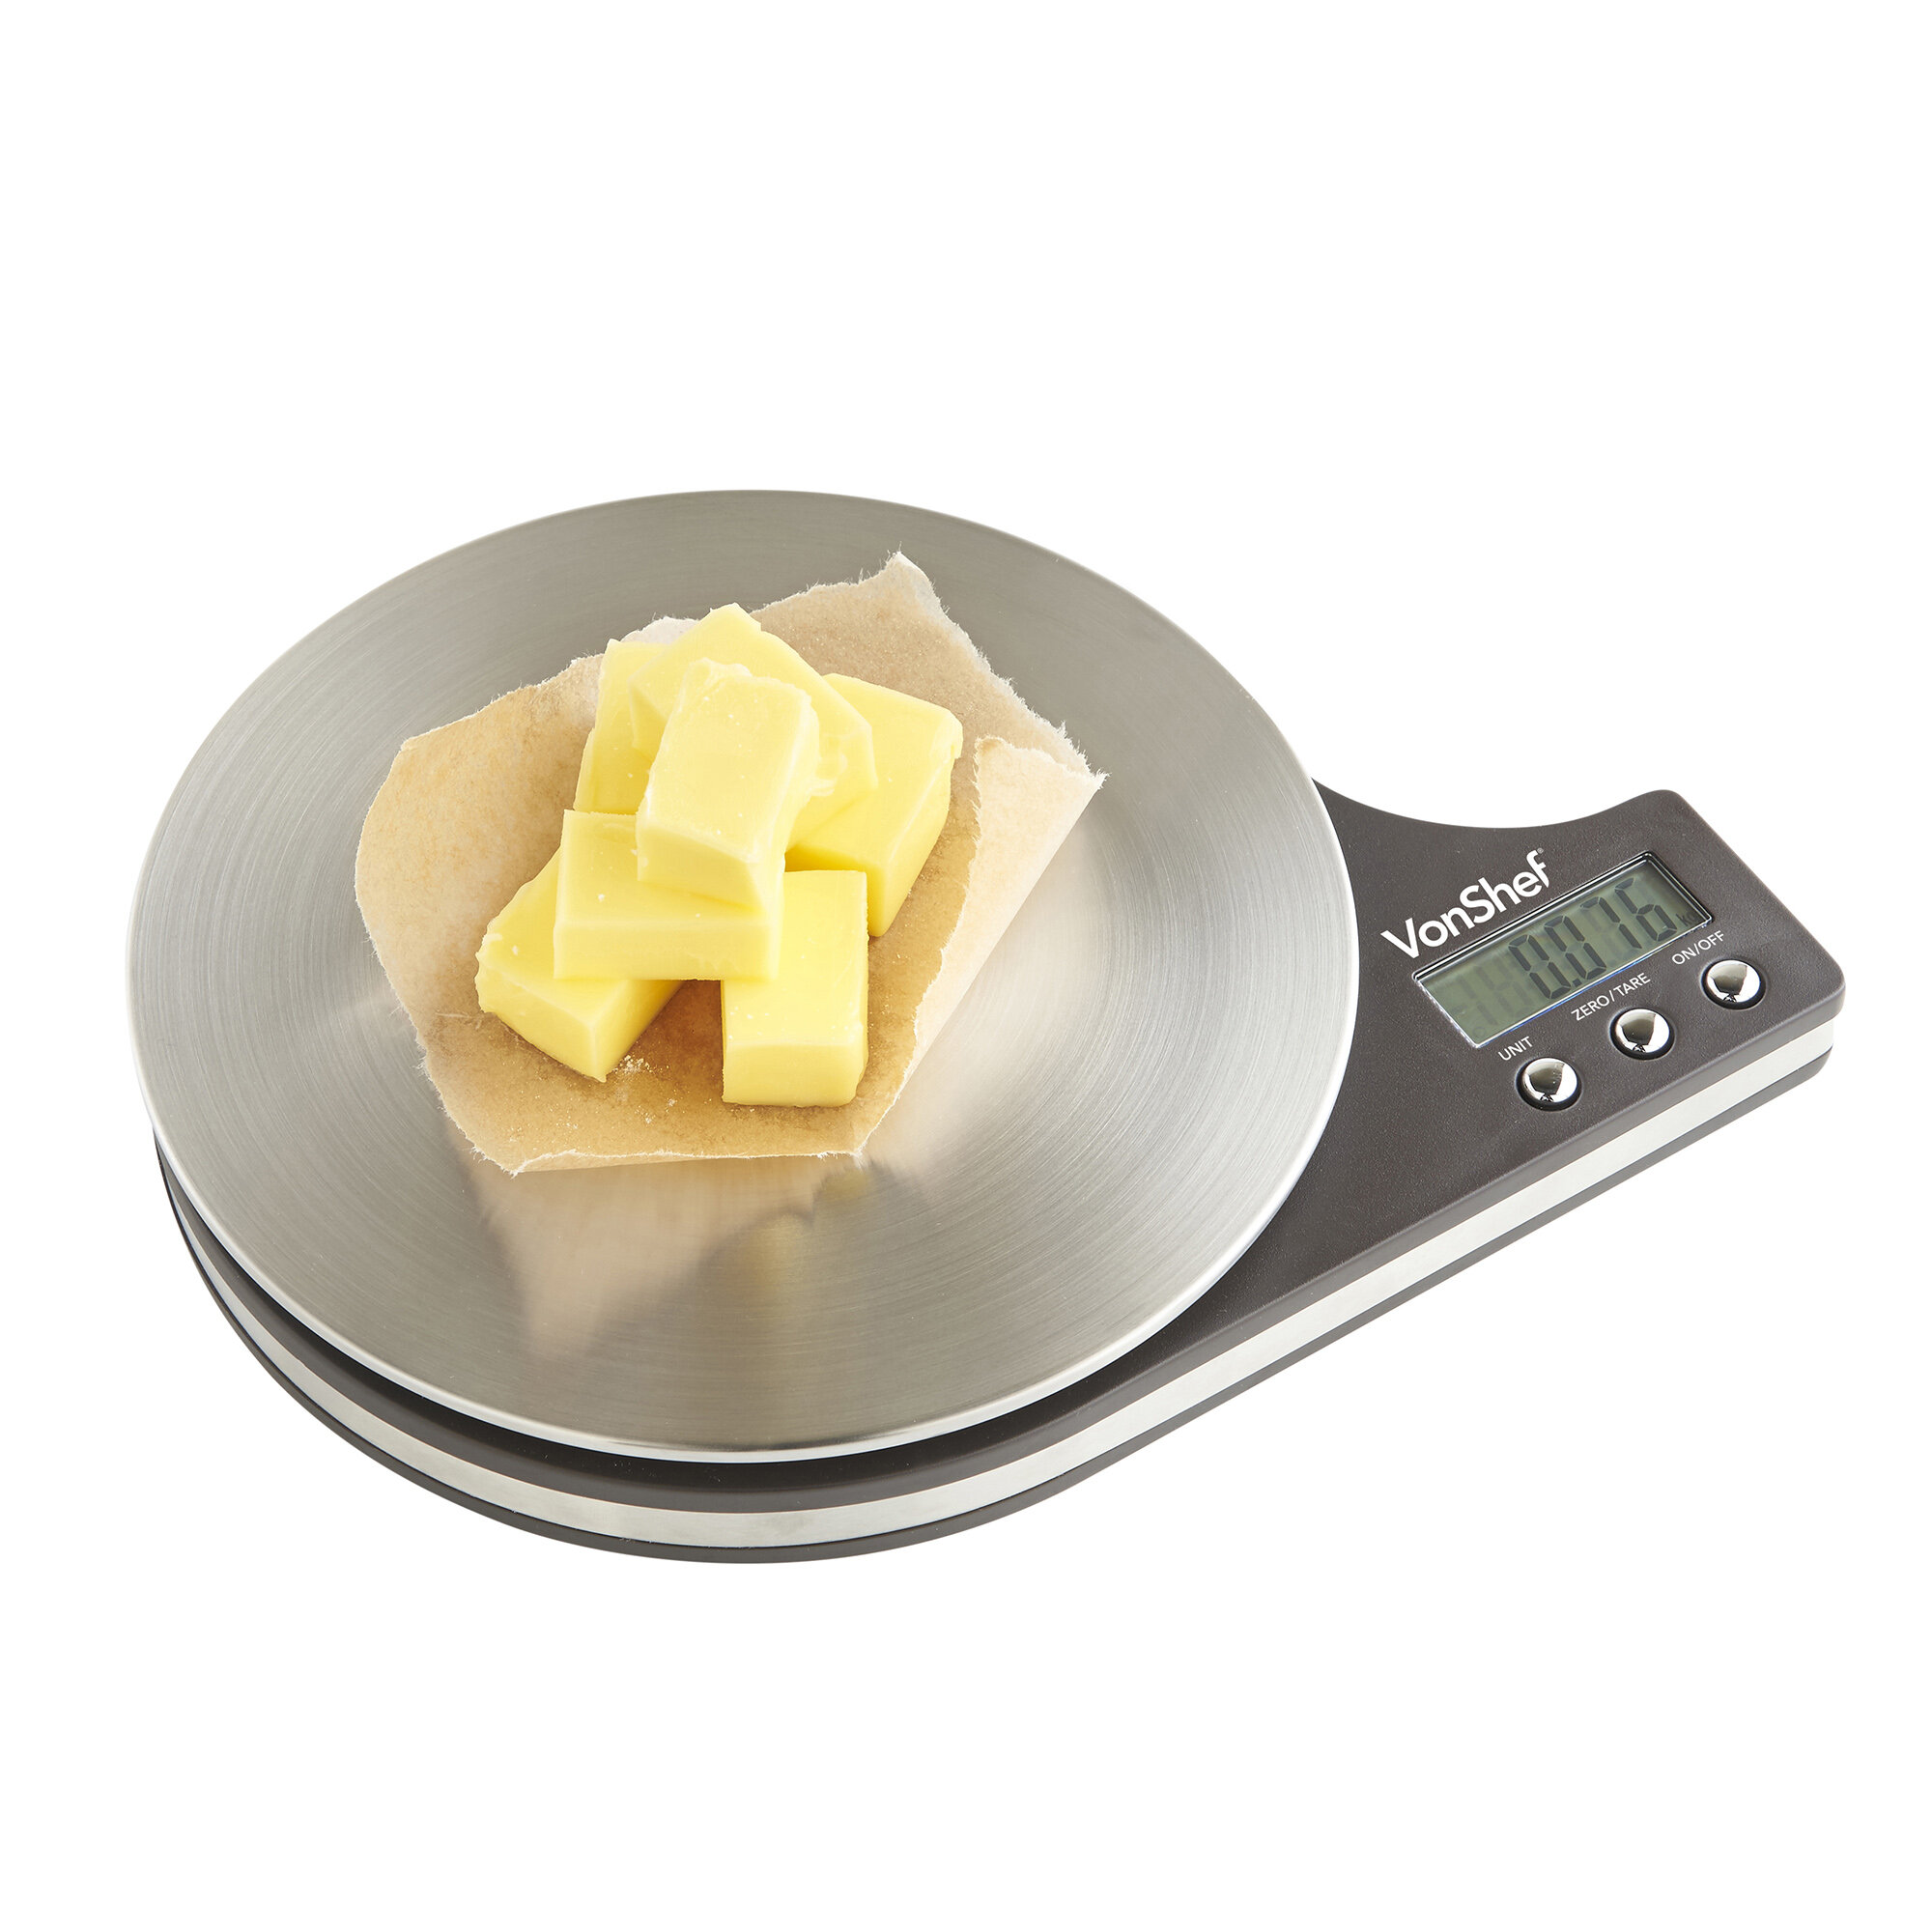 Stainless Steel LED Digital Kitchen Scale, 3897